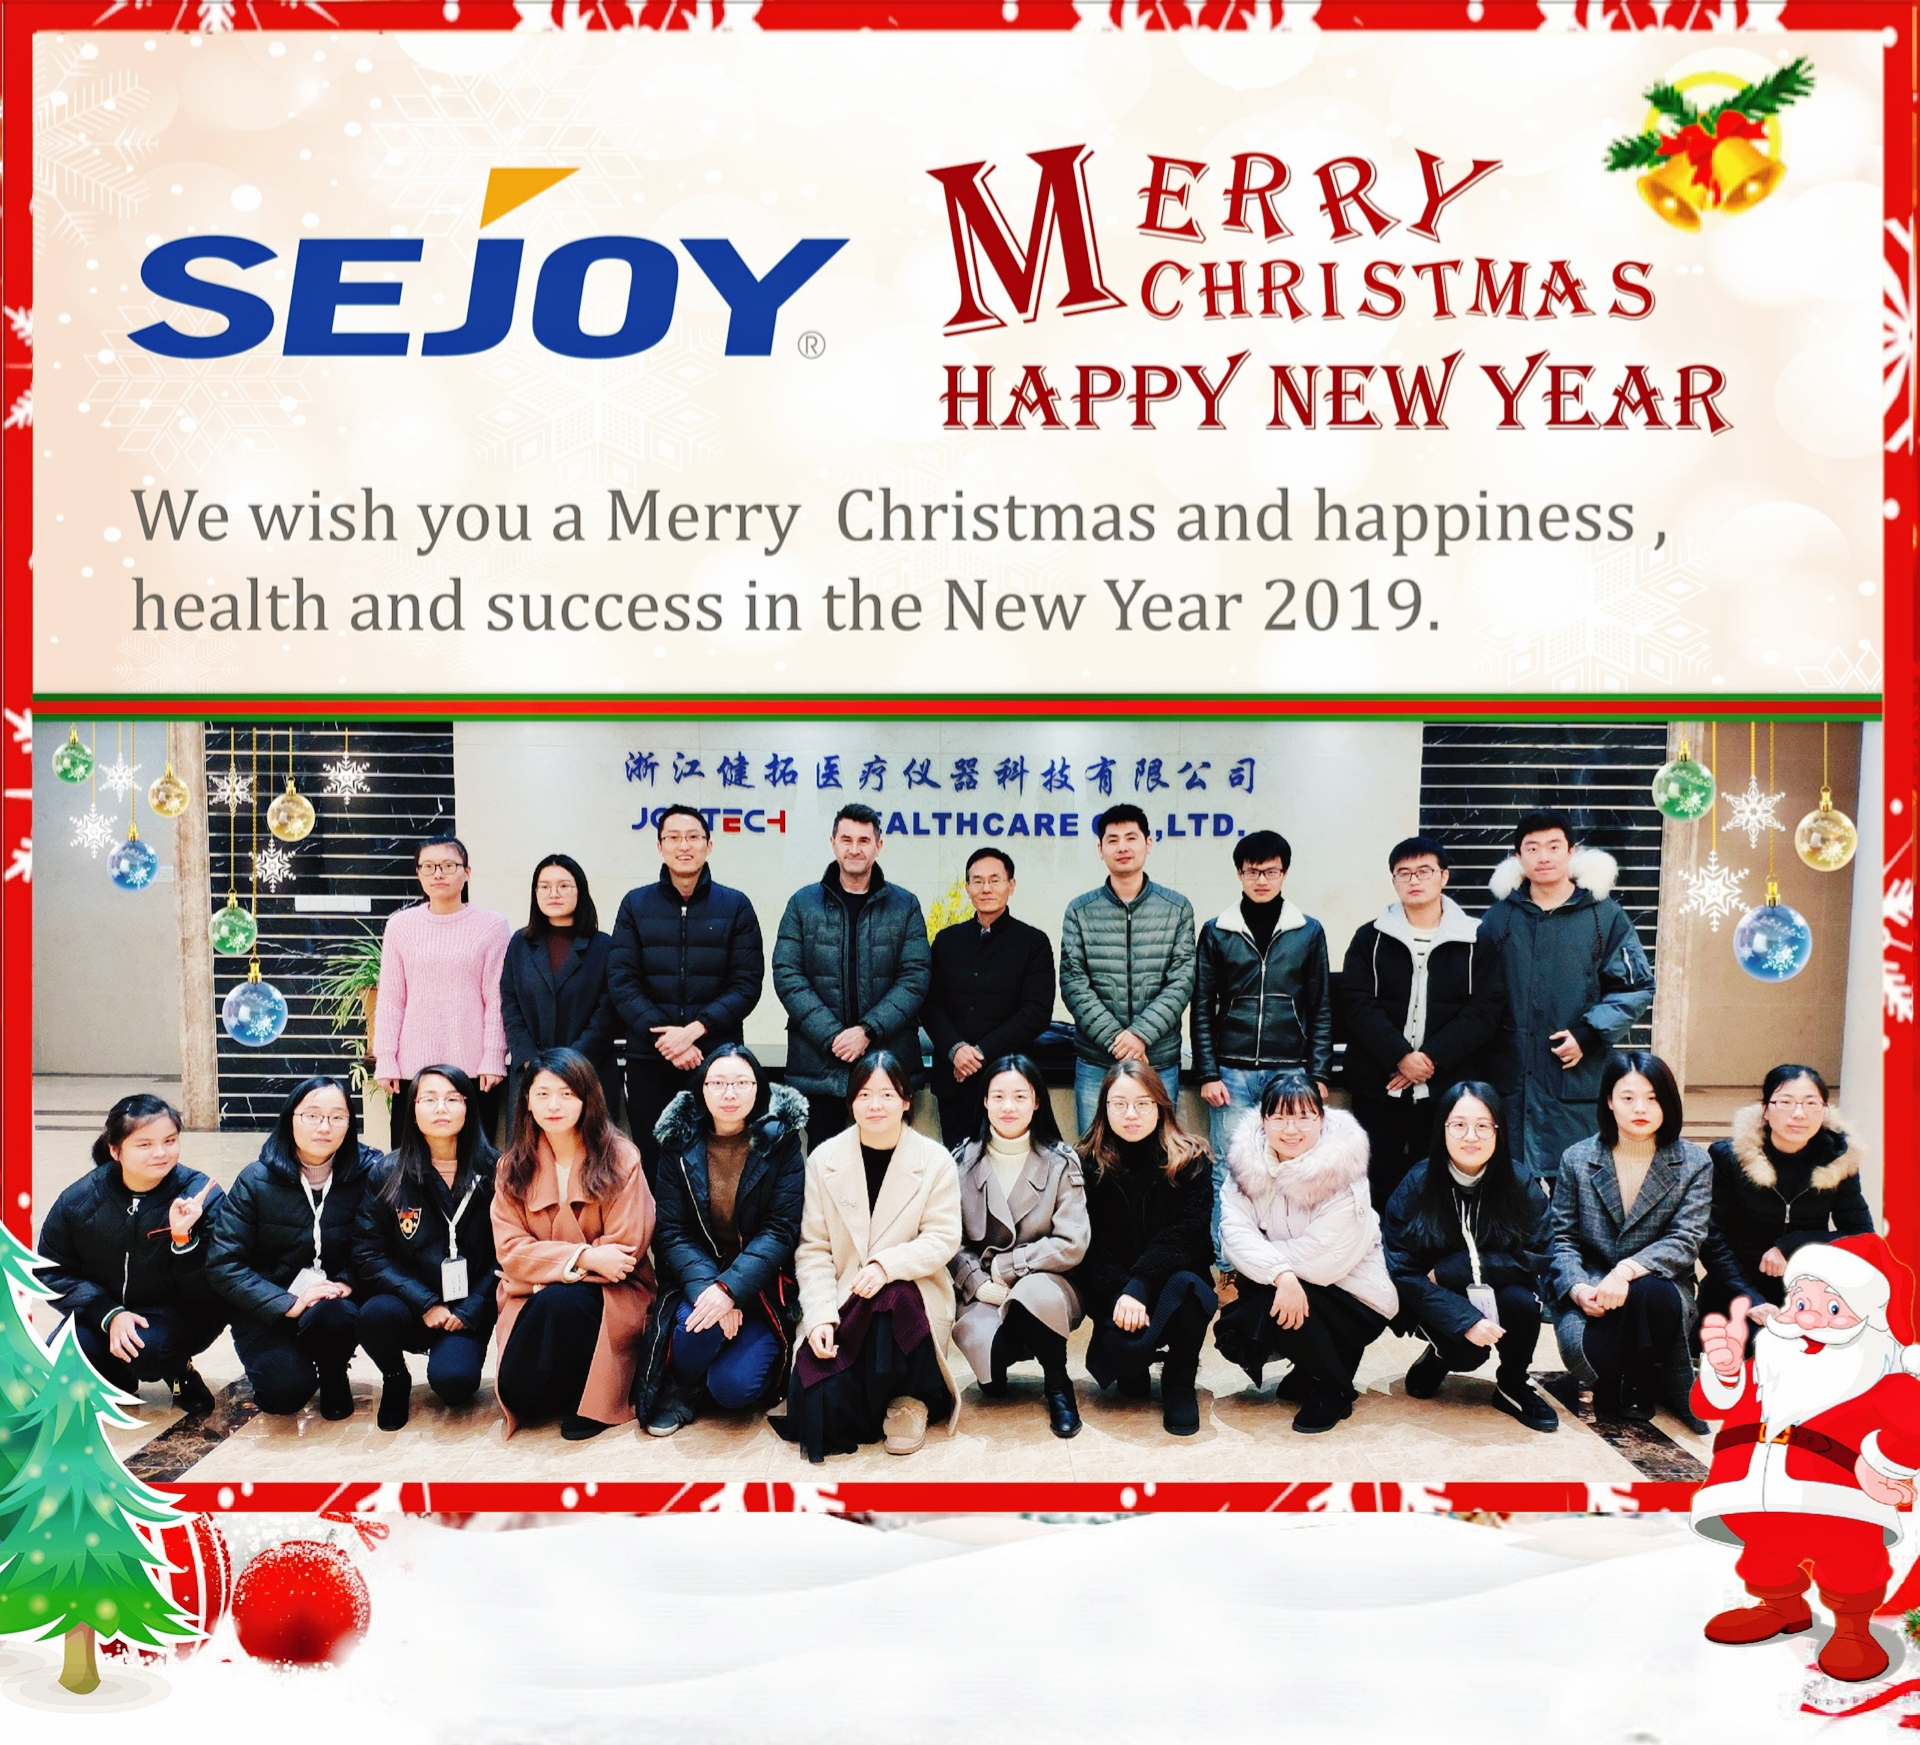 SEJOY BLESSINGS FOR YOU IN 2019!